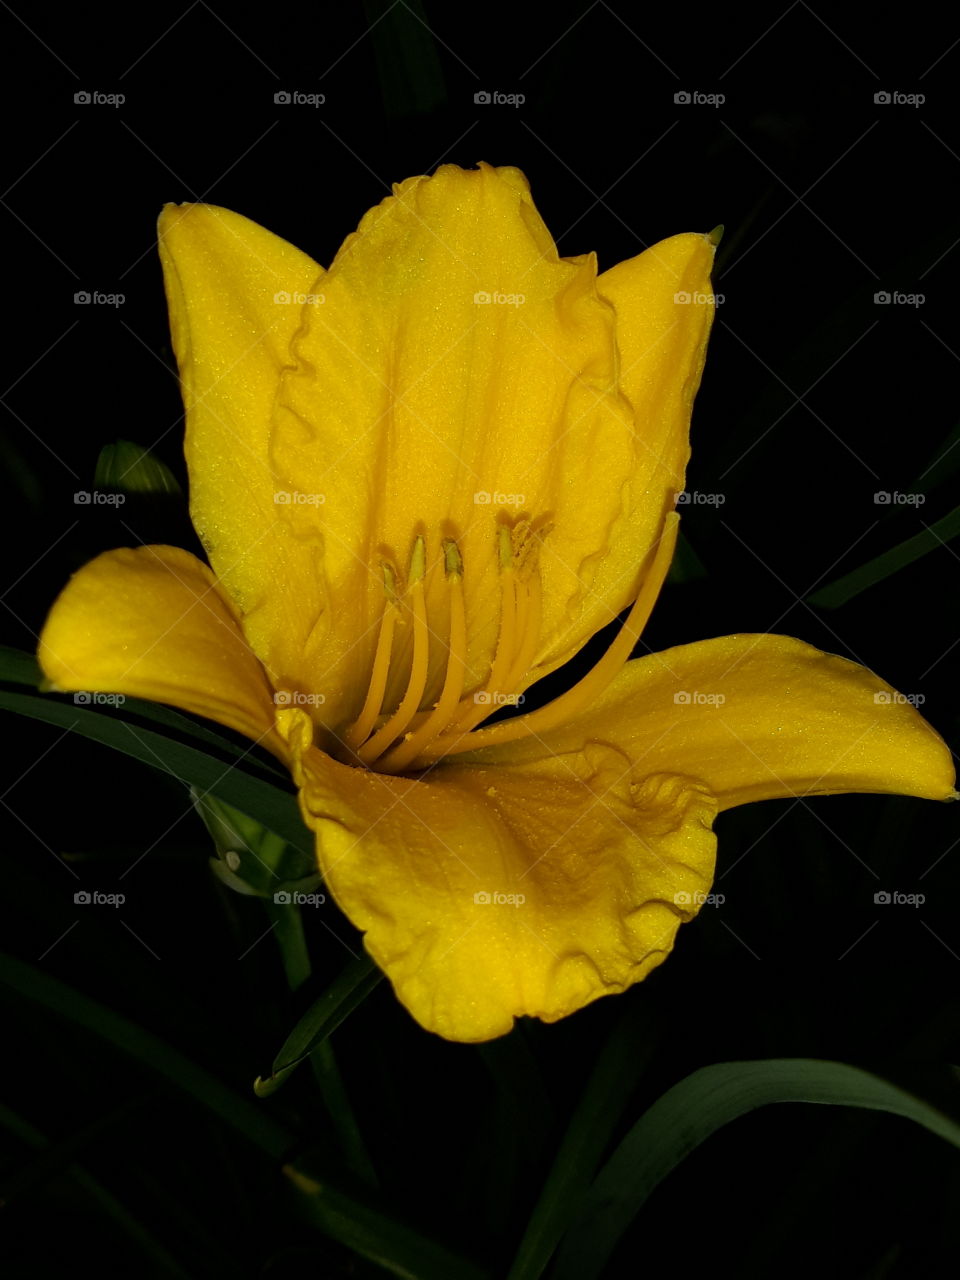 Yellow flower in the night.